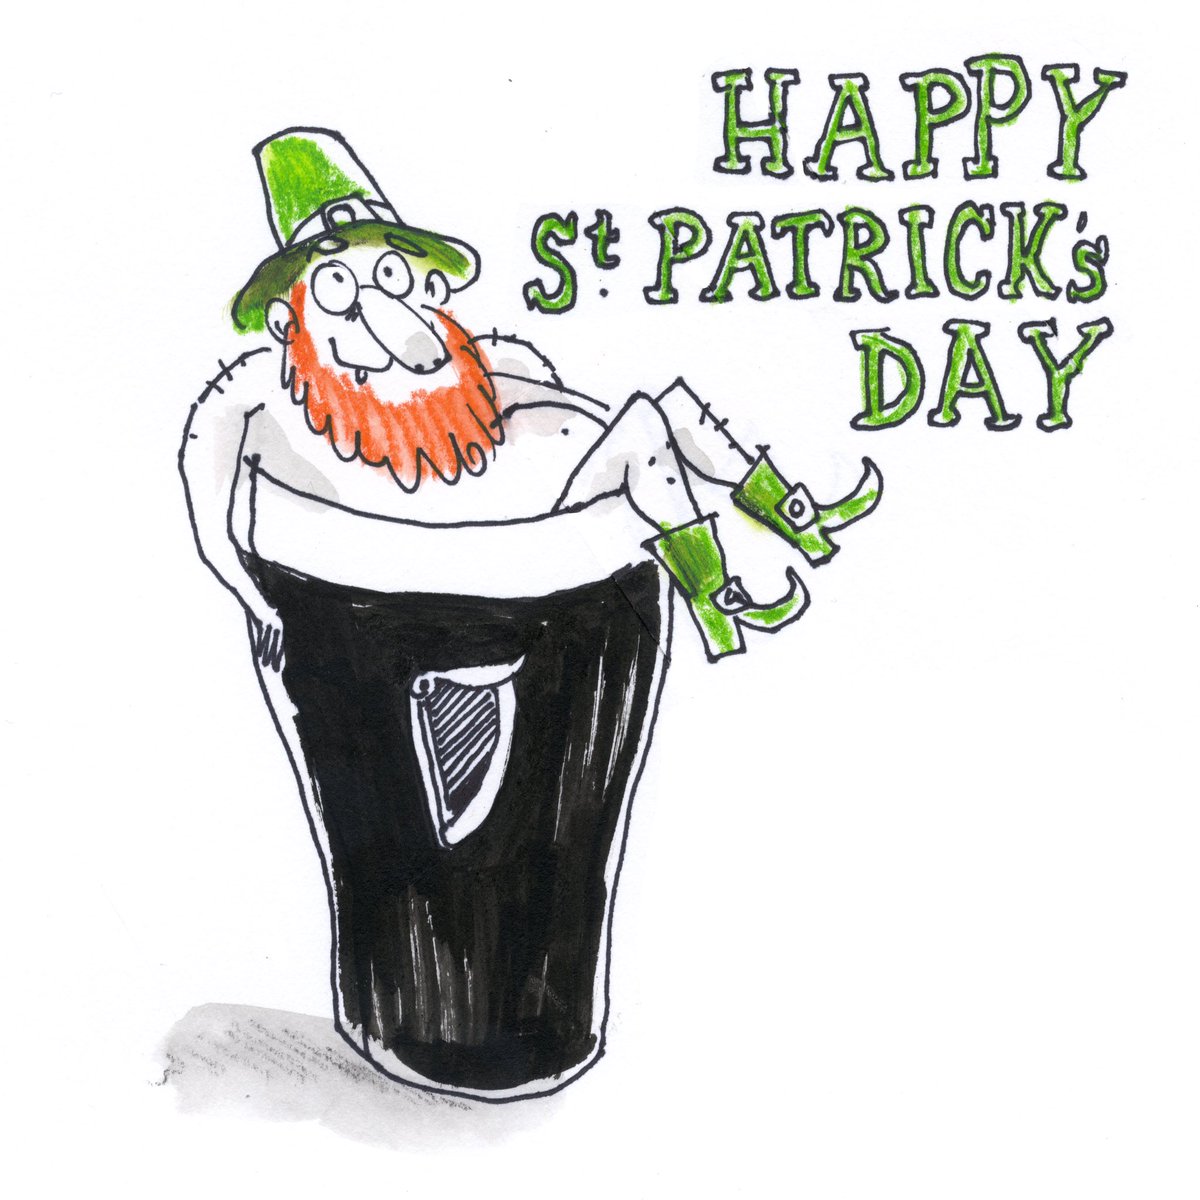 Waiter waiter, there’s a #leprechaun in my pint! Happy #StPatrickDay to my Irish friends, and those who want any excuse for a pint. #doodle #penandink